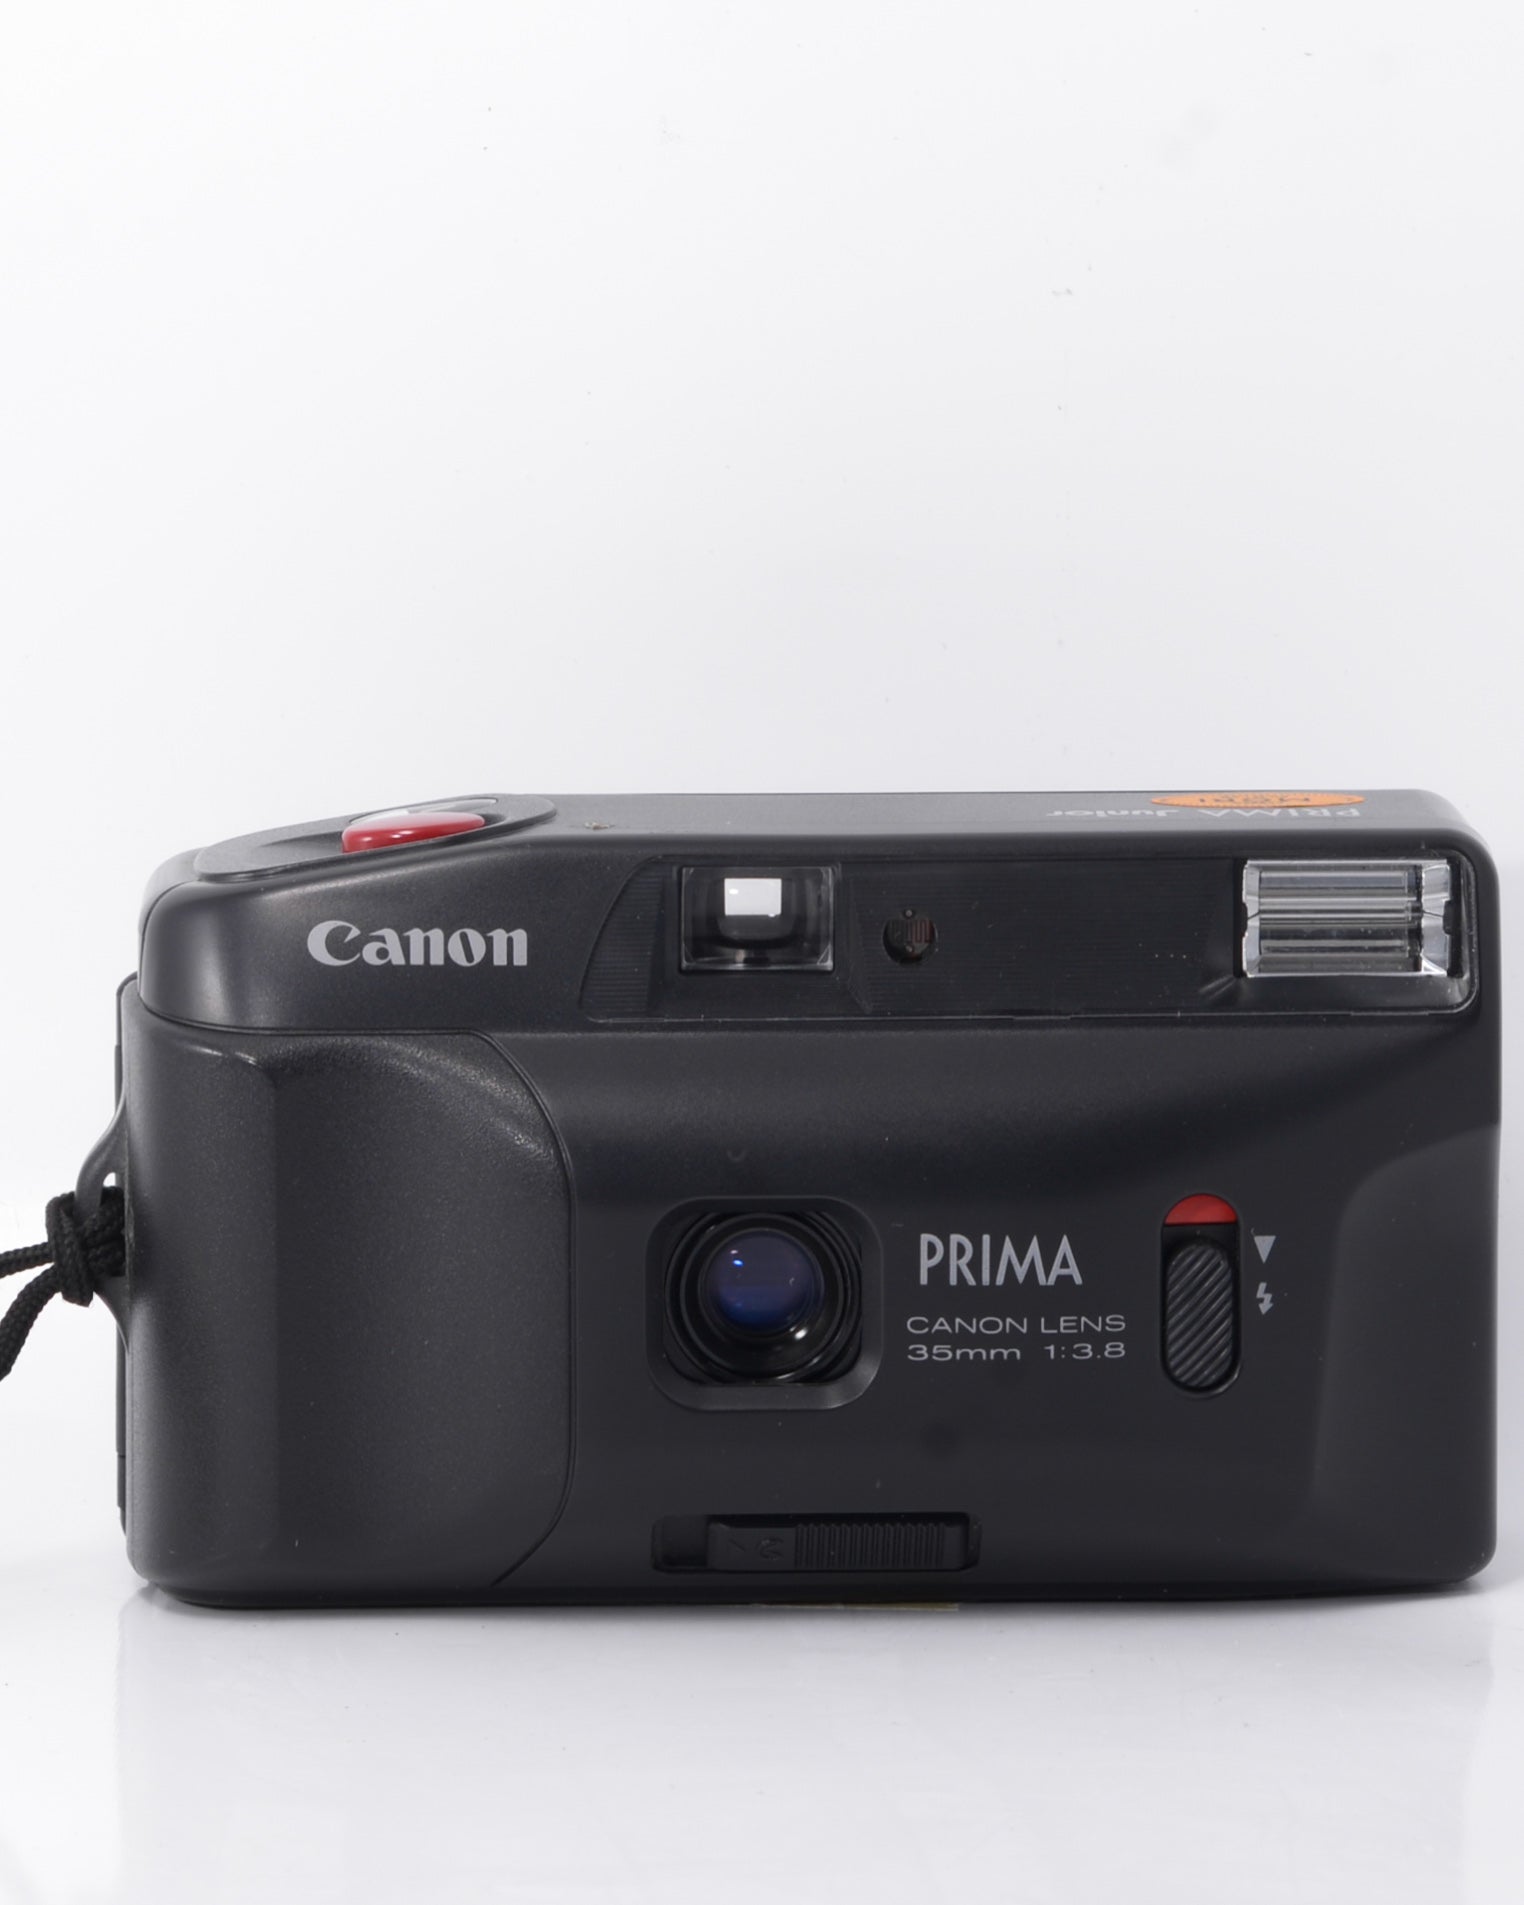 Canon Prima Junior 35mm Point & Shoot Film Camera with 35mm f3.8 lens